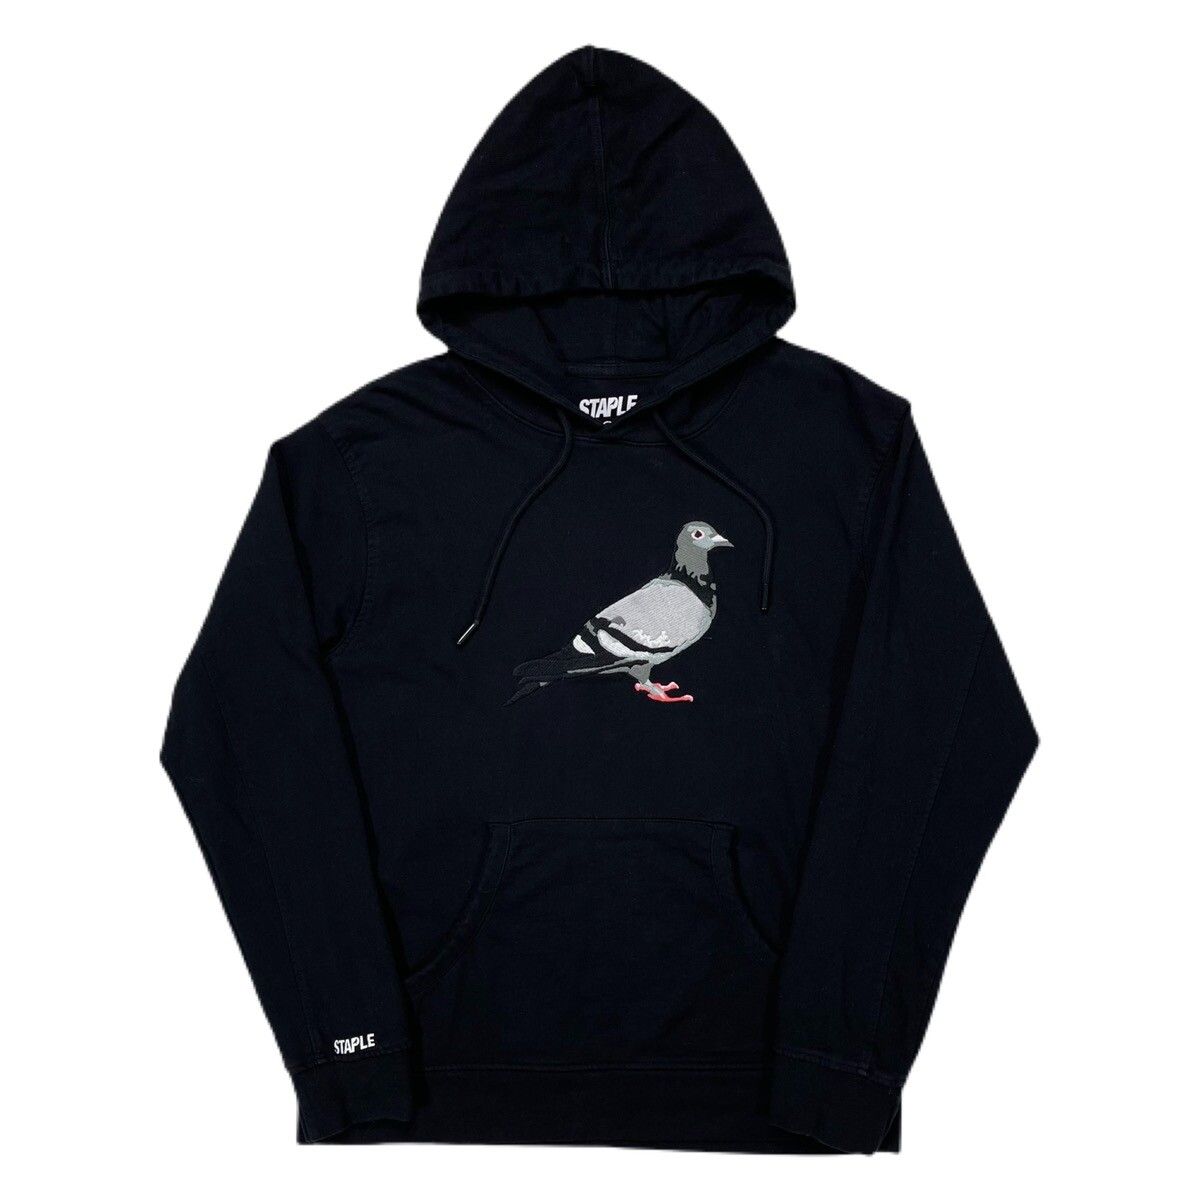 Staple Staple Pigeon Embroidered Hoodie Sweatshirt Pullover Size US M / EU 48-50 / 2 - 1 Preview